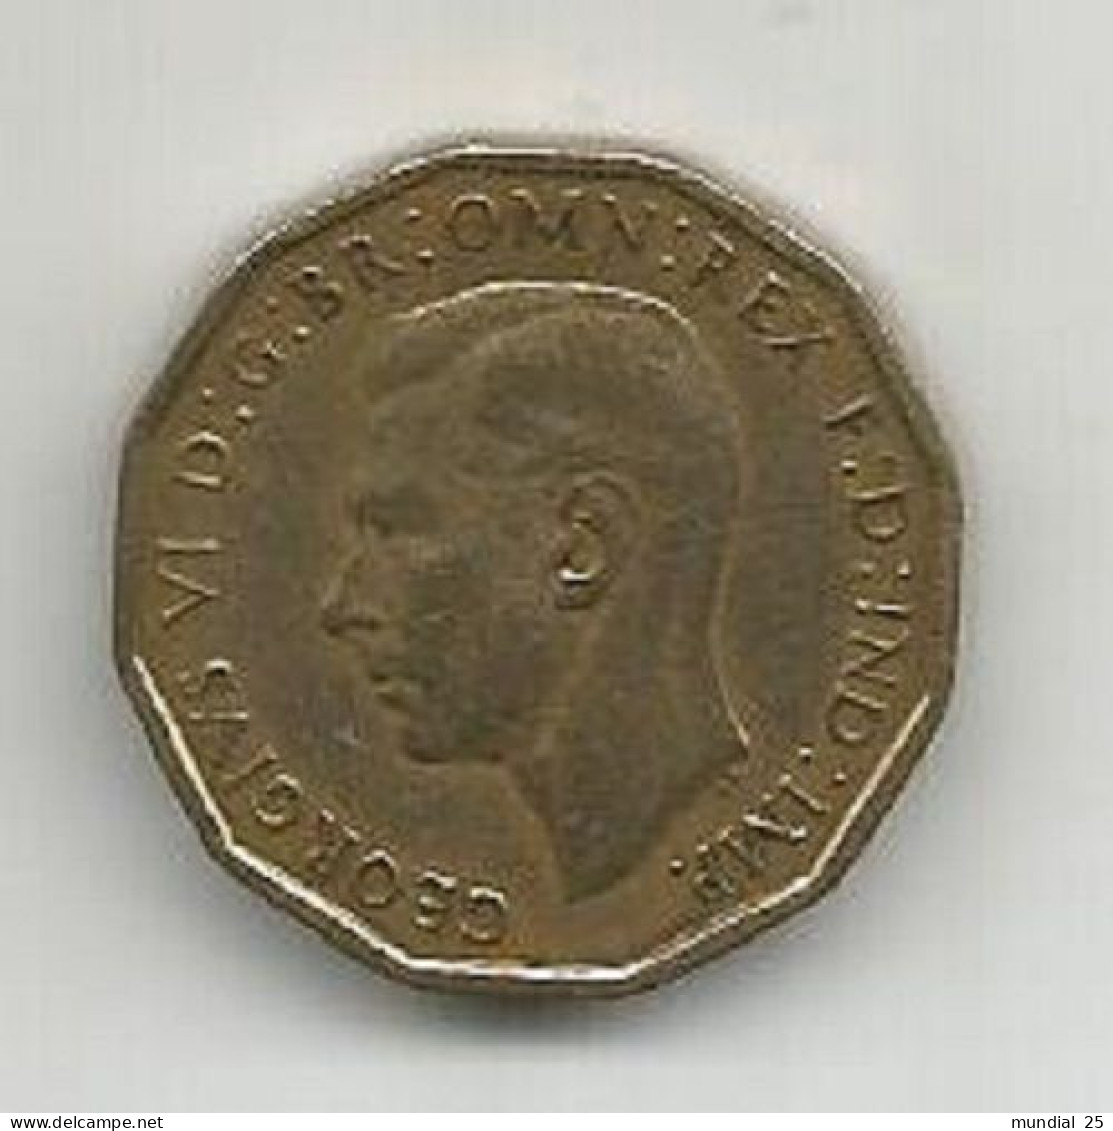 GREAT BRITAIN 3 PENCE 1944 - F. 3 Pence